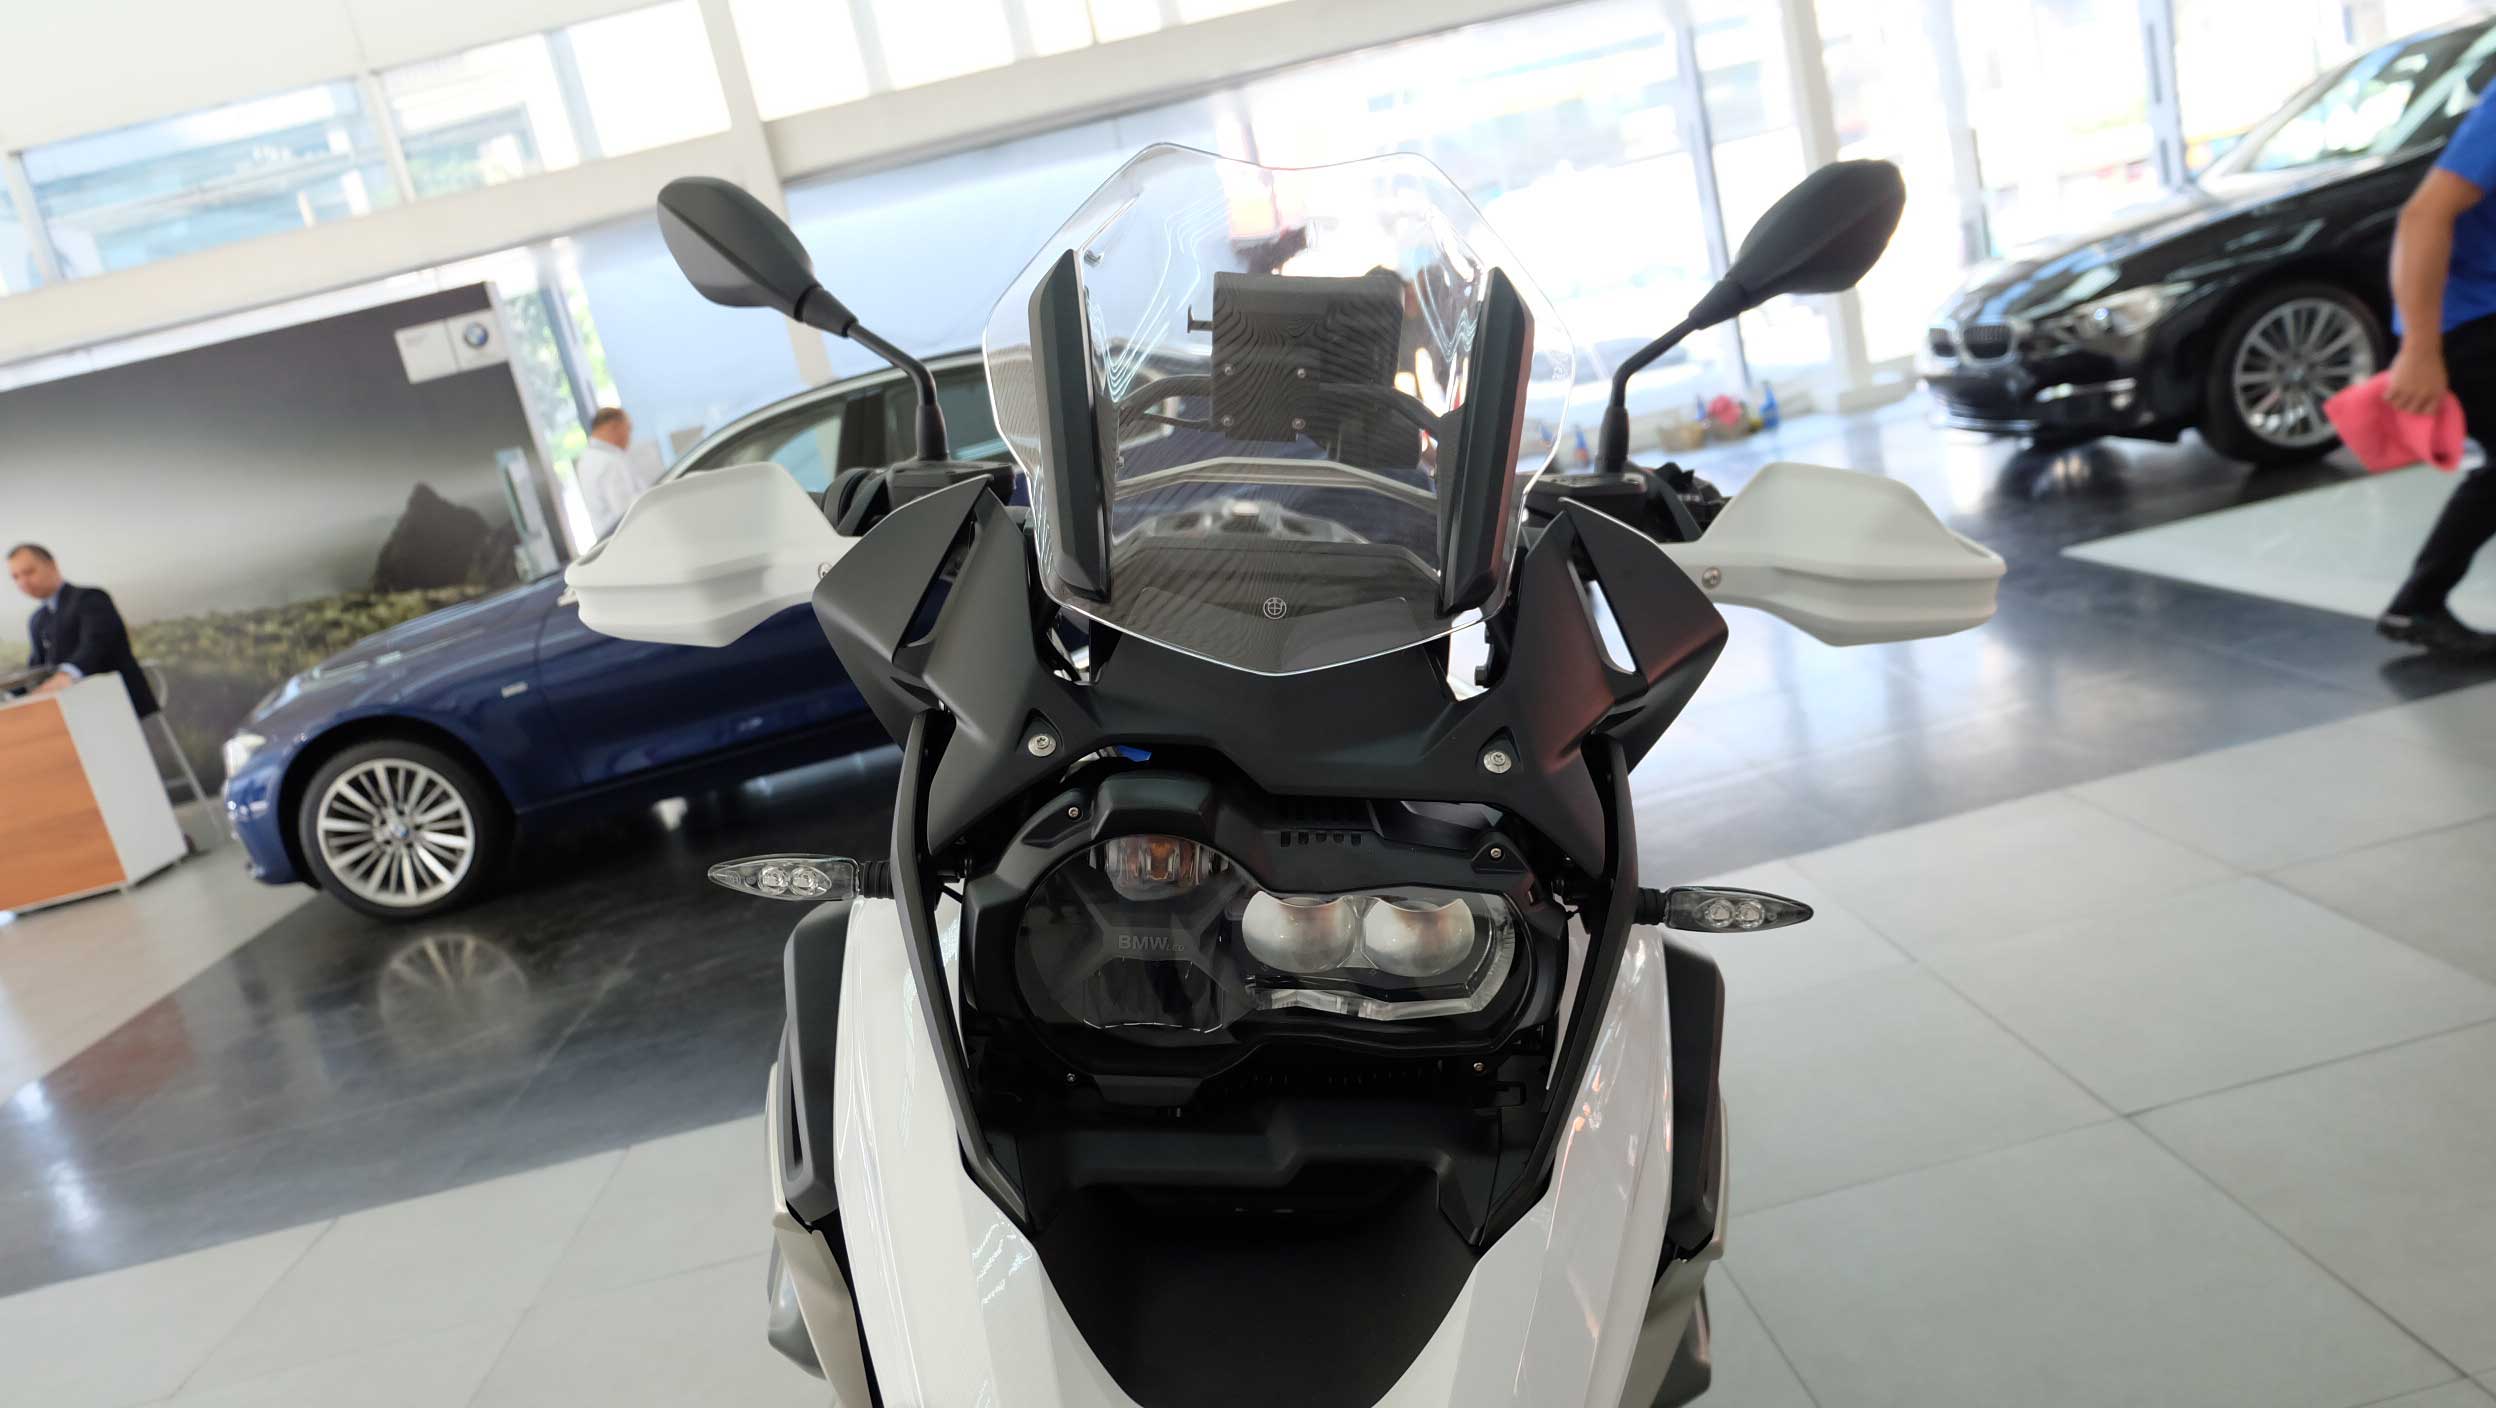 19 Bmw R 1250 Gs Hp Price Features Specs Category